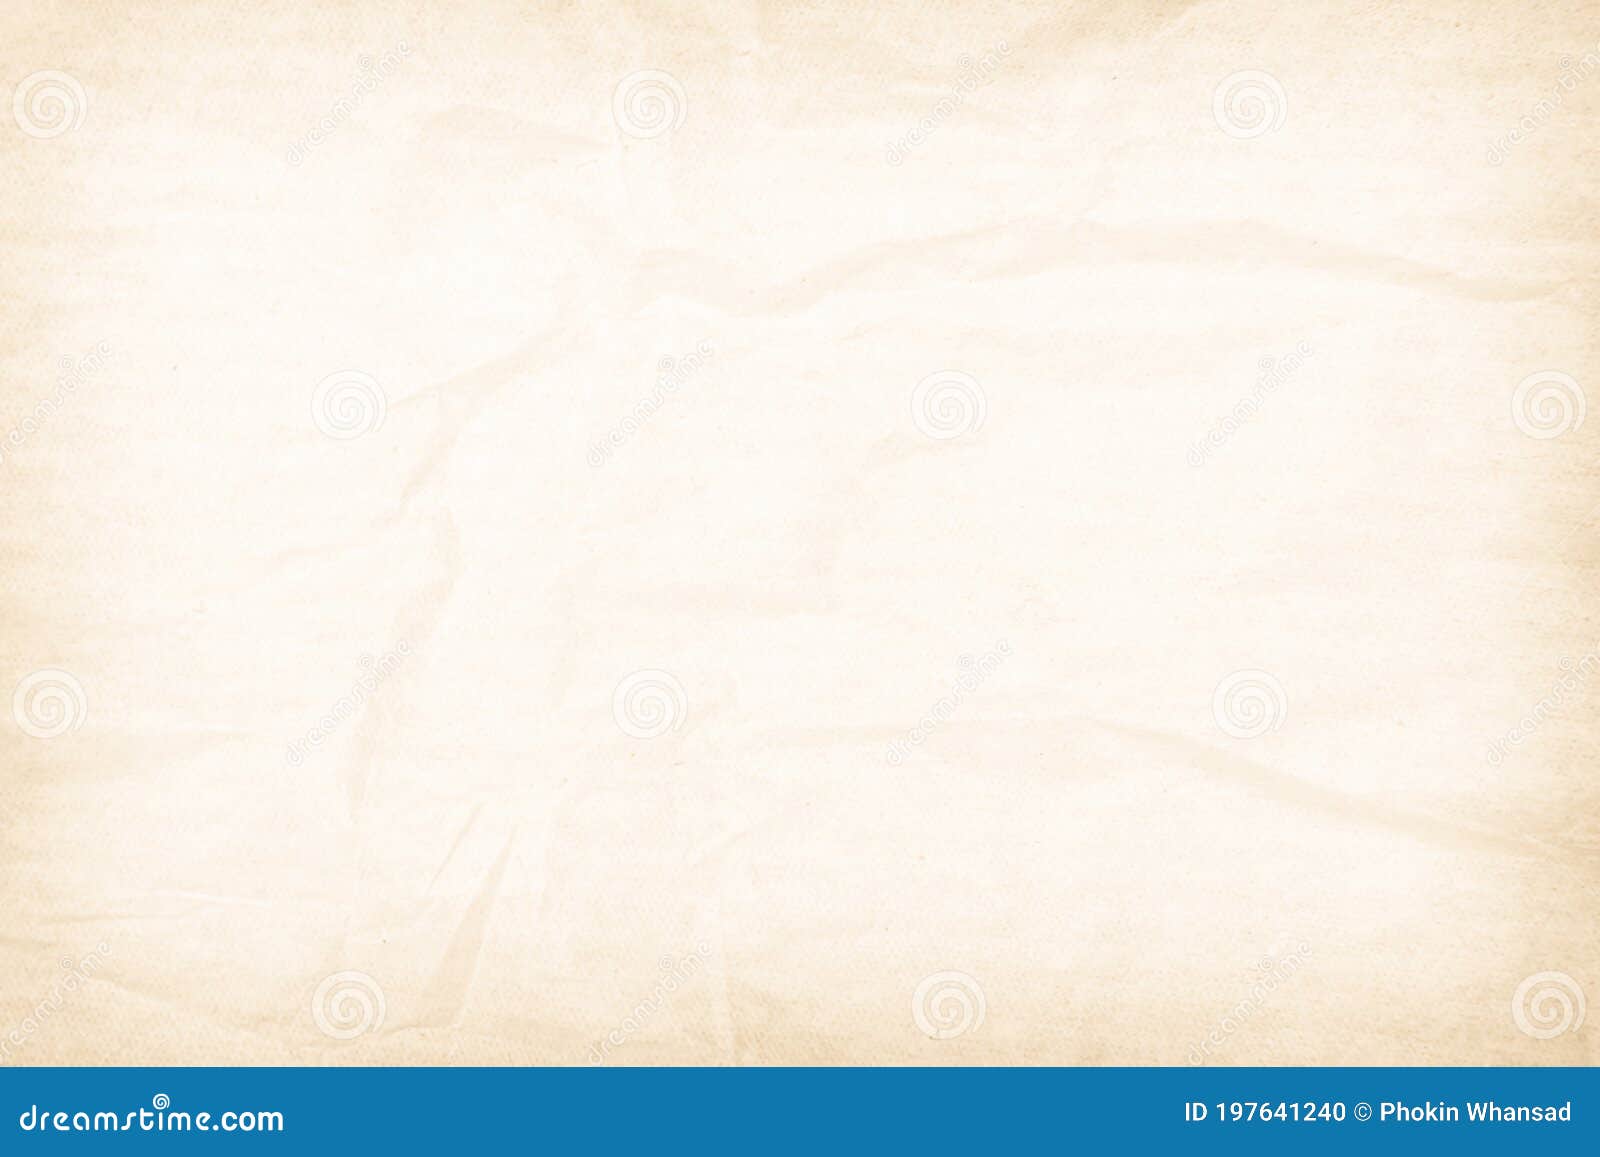 3 697 Blank Newspaper Texture Photos Free Royalty Free Stock Photos From Dreamstime